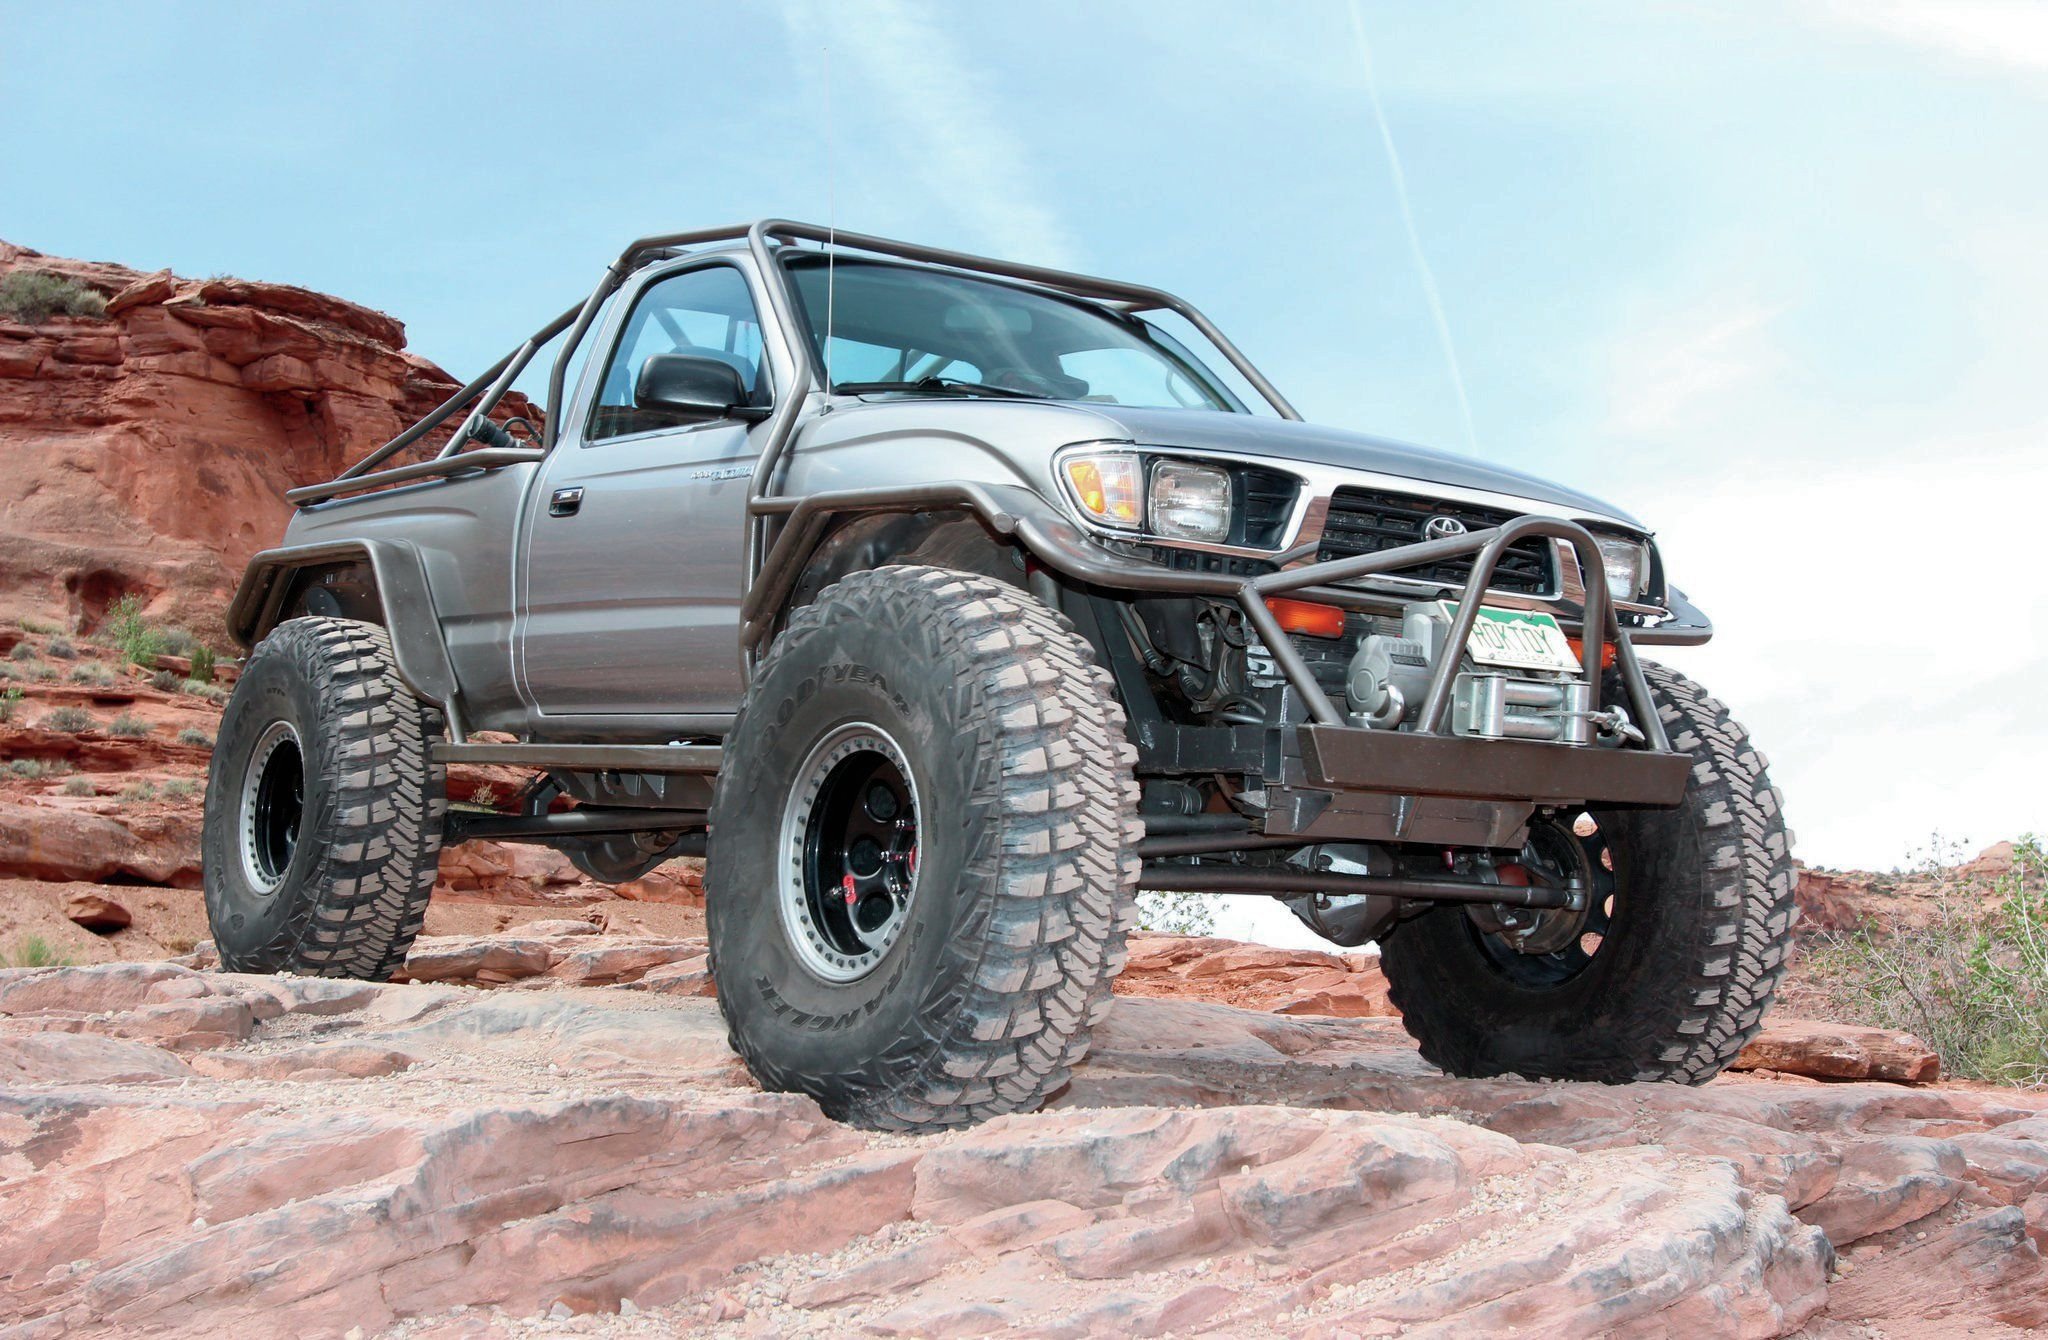 1995 toyota tacoma pickup offroad 4x4 custom truck wallpapers hd desktop and mobile backgrounds